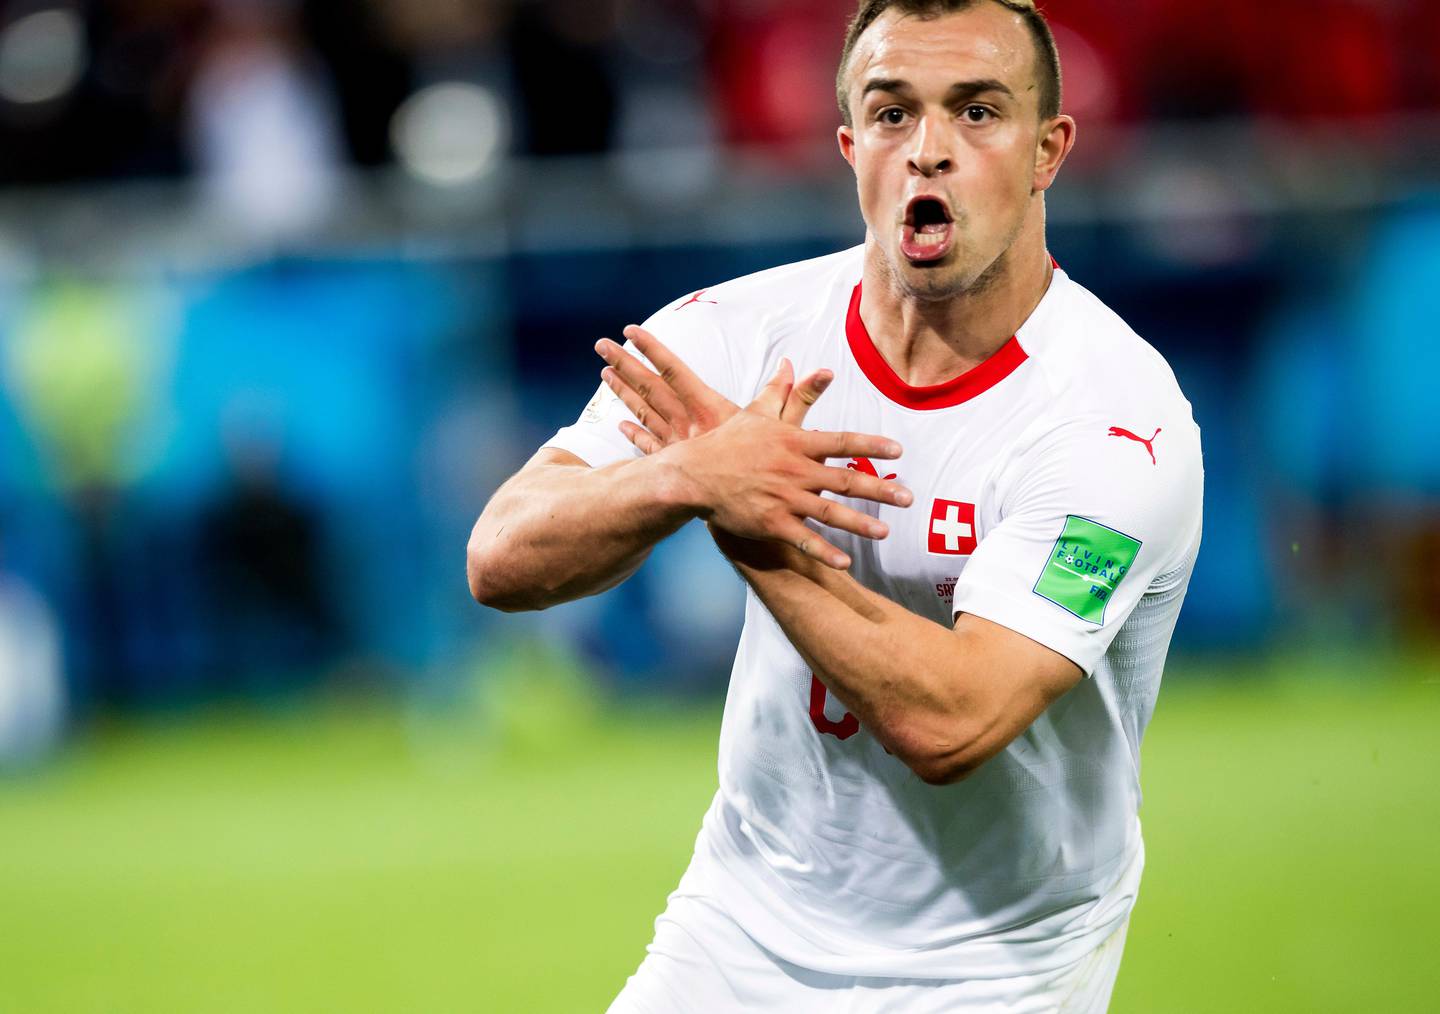 Switzerland's Xherdan Shaqiri celebrates after scoring his side's second goal during the group E match between Switzerland and Serbia at the 2018 soccer World Cup in the Kaliningrad Stadium in Kaliningrad, Russia, Friday, June 22, 2018. (Laurent Gillieron/Keystone via AP)